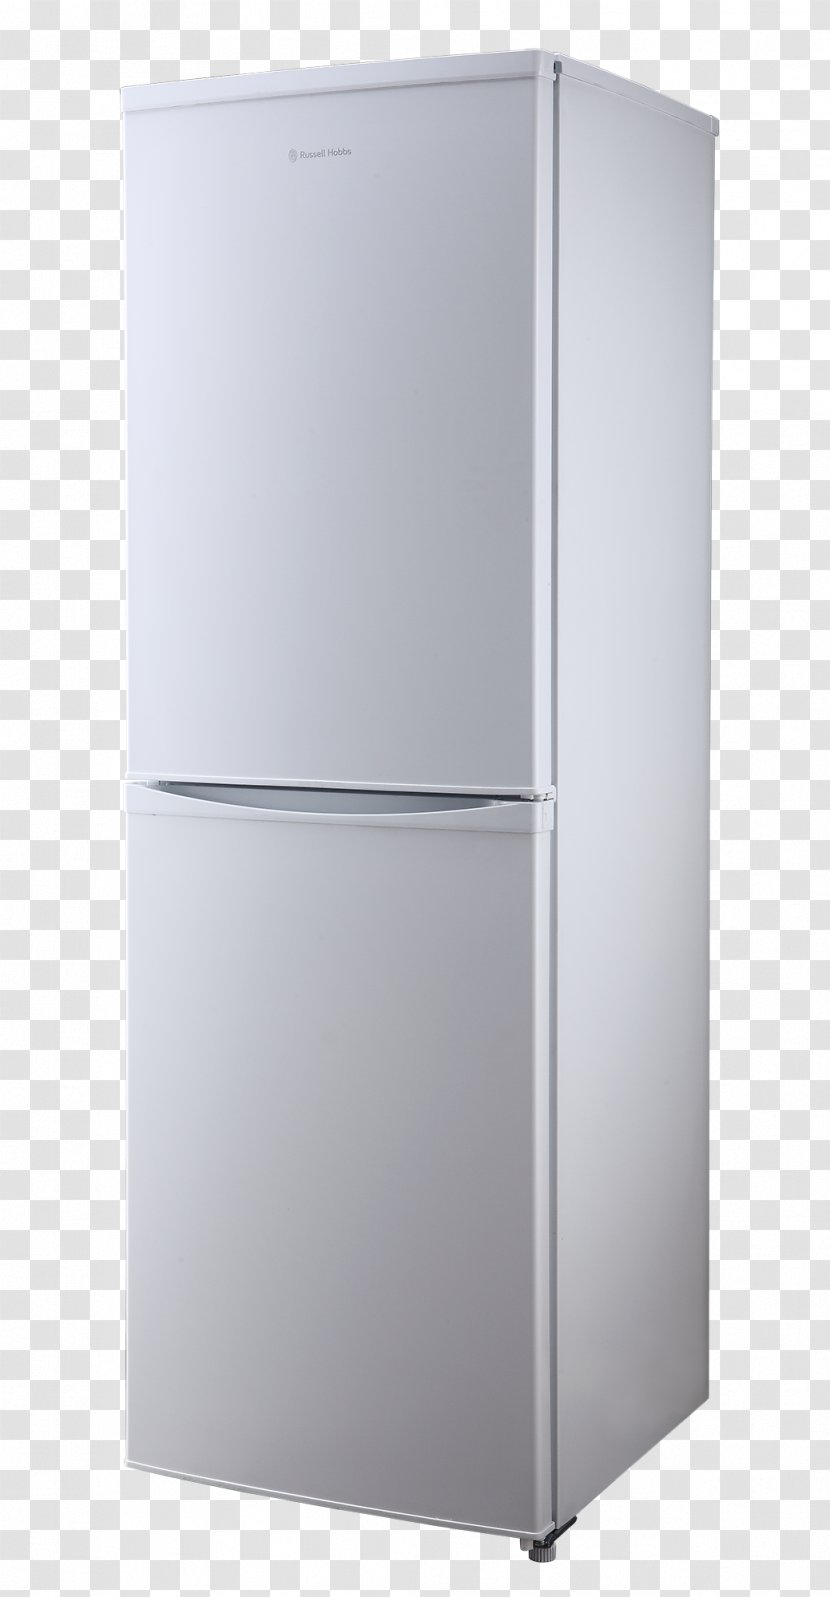 Auto-defrost Refrigerator Russell Hobbs Freezers Larder - Home Appliance Transparent PNG